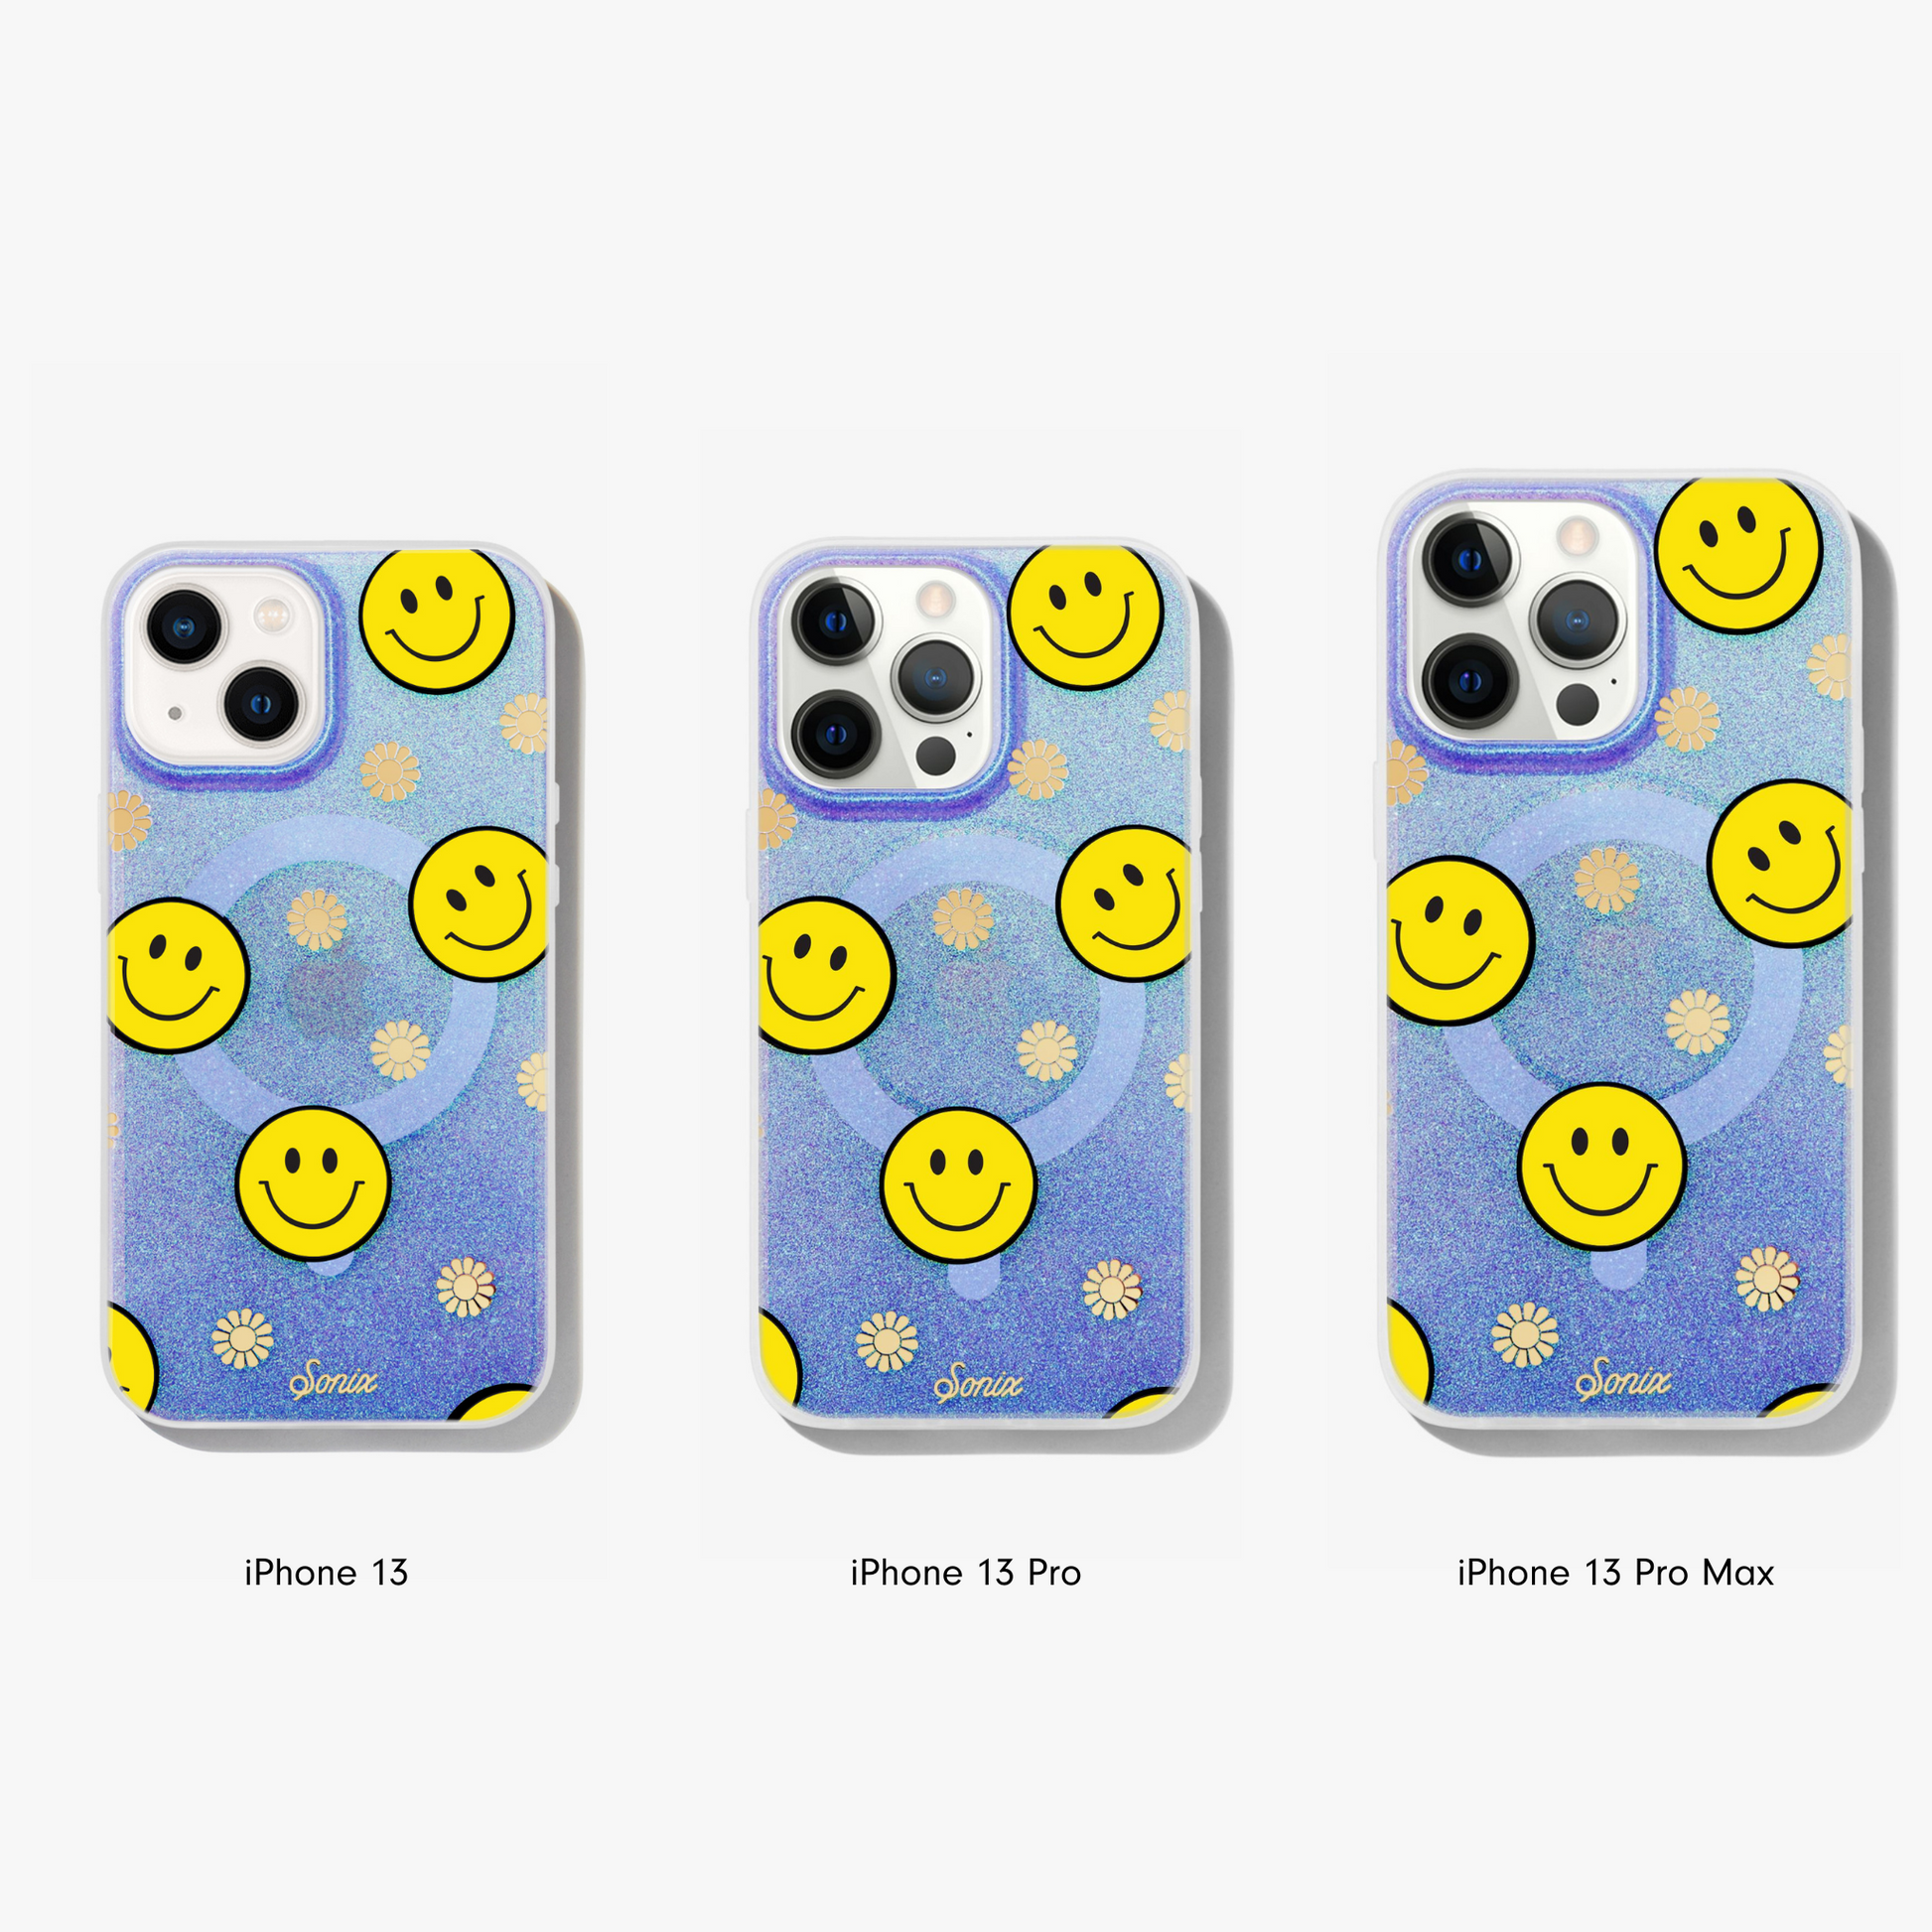 The clear purple case infused with iridescent glitter features happy faces and signature gold foil flowers shown on an iphone 13, iphone 13 pro, and iphone 13 pro max